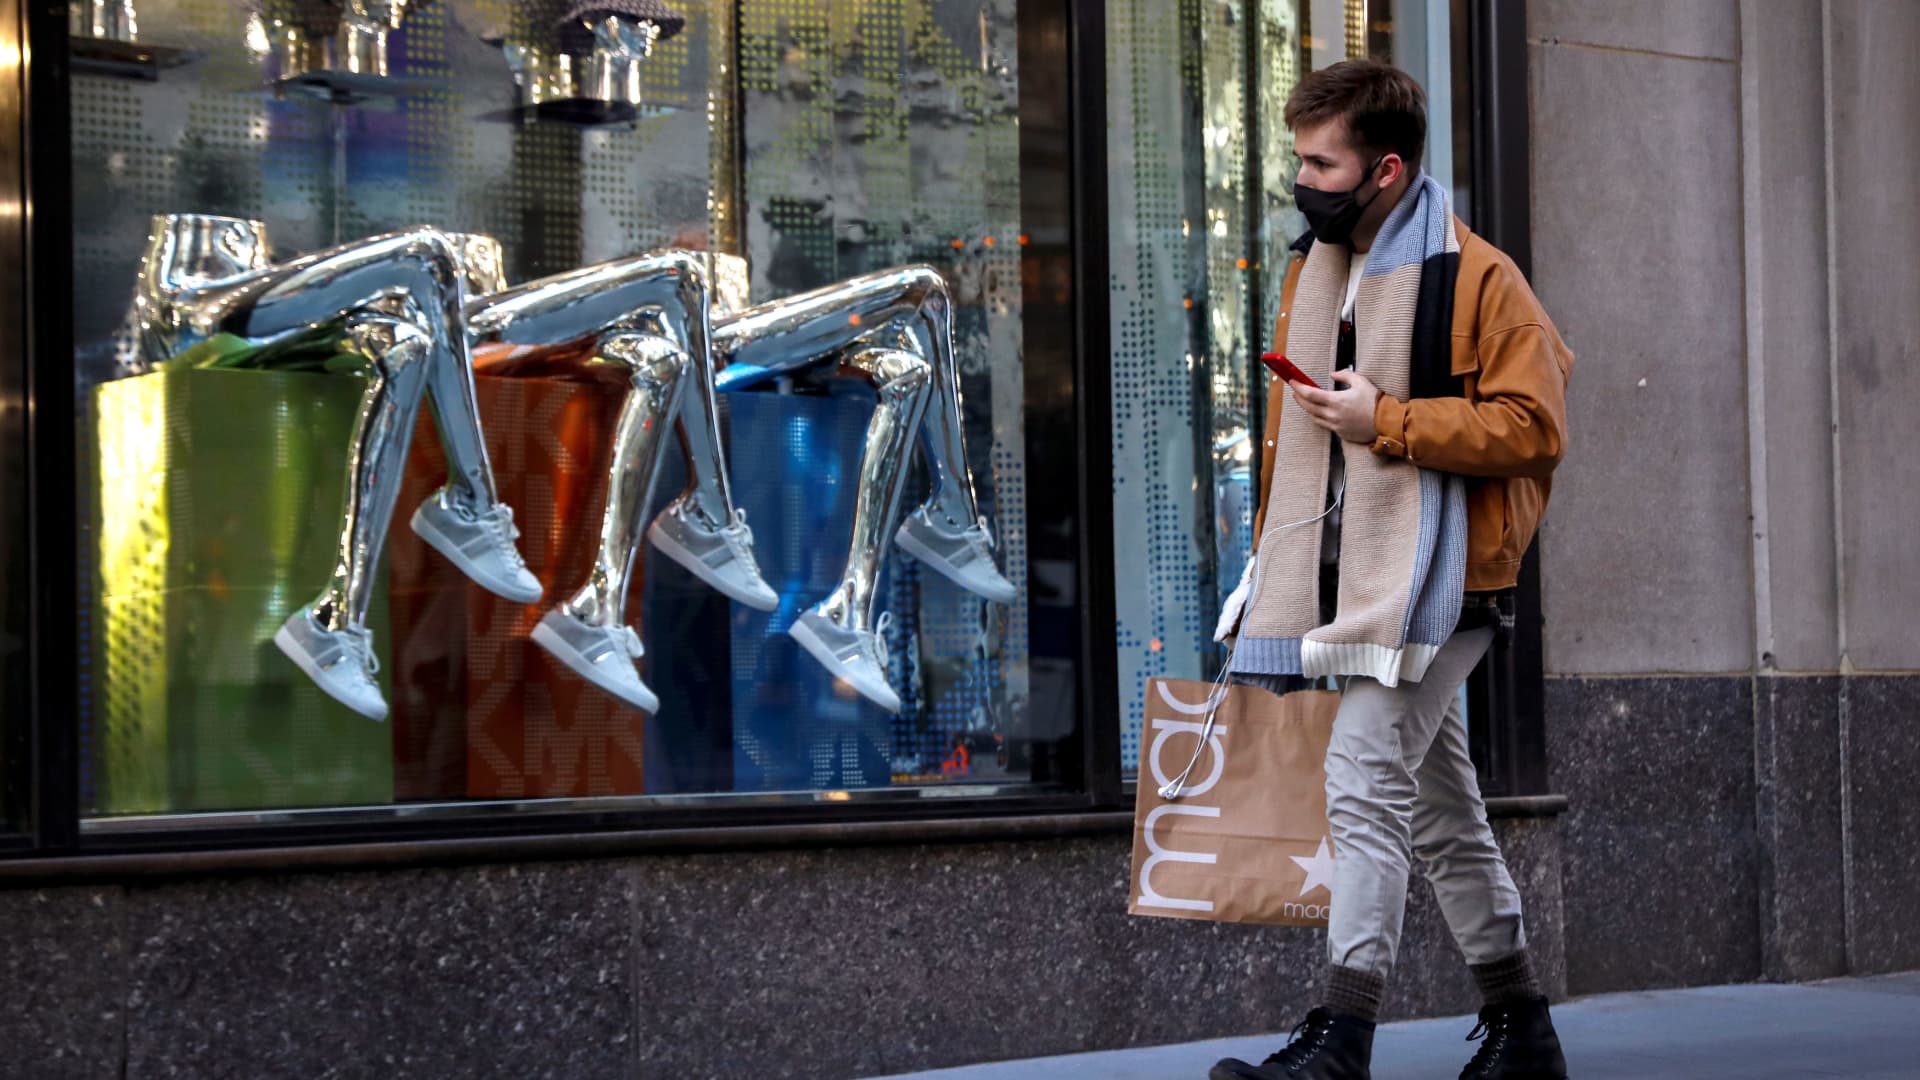 A man shops, during the coronavirus disease (COVID-19) pandemic, on 5th Avenue in New York, February 17, 2021.